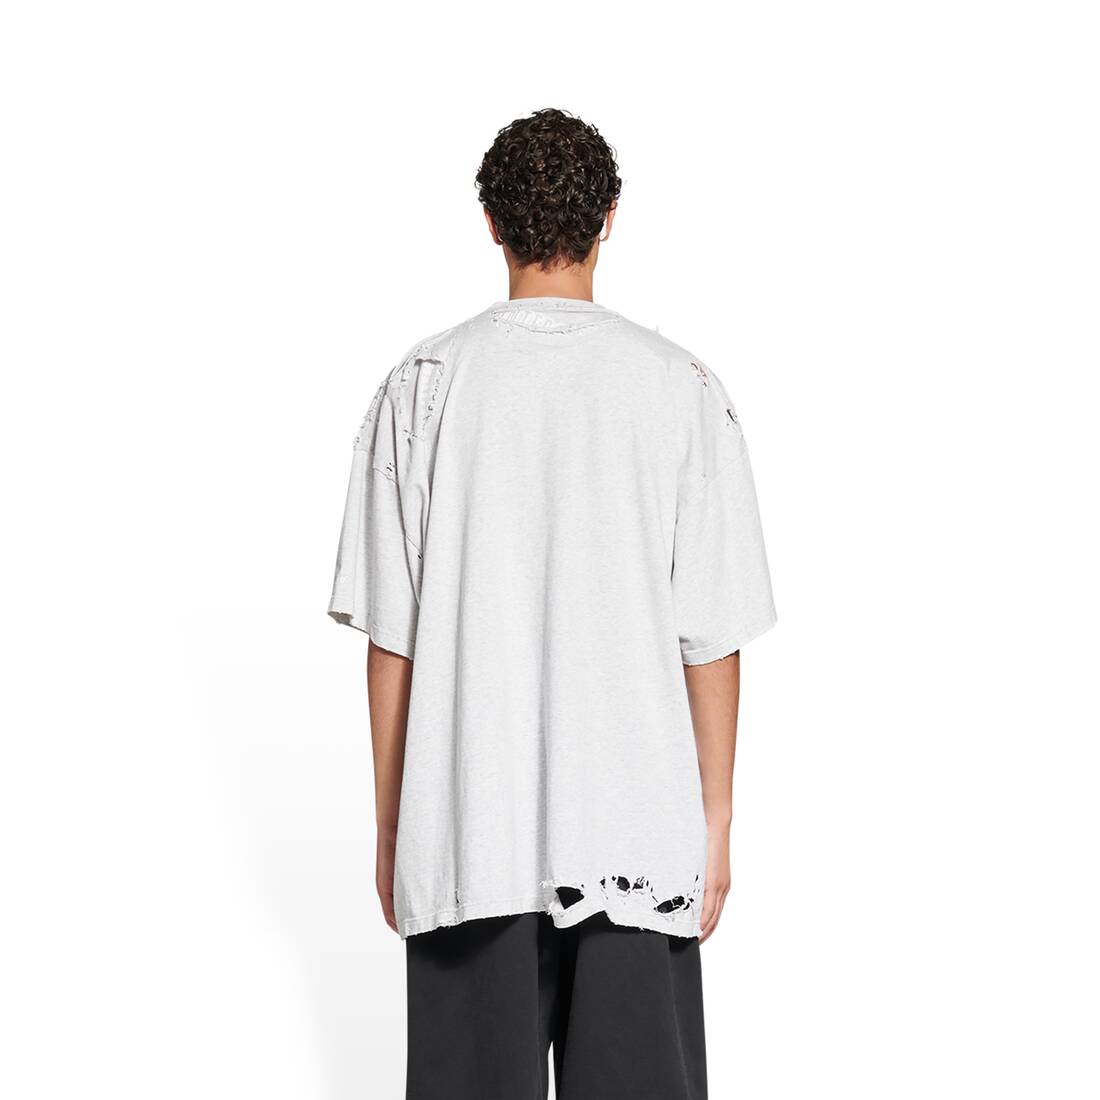 3b sports icon repaired t-shirt oversized